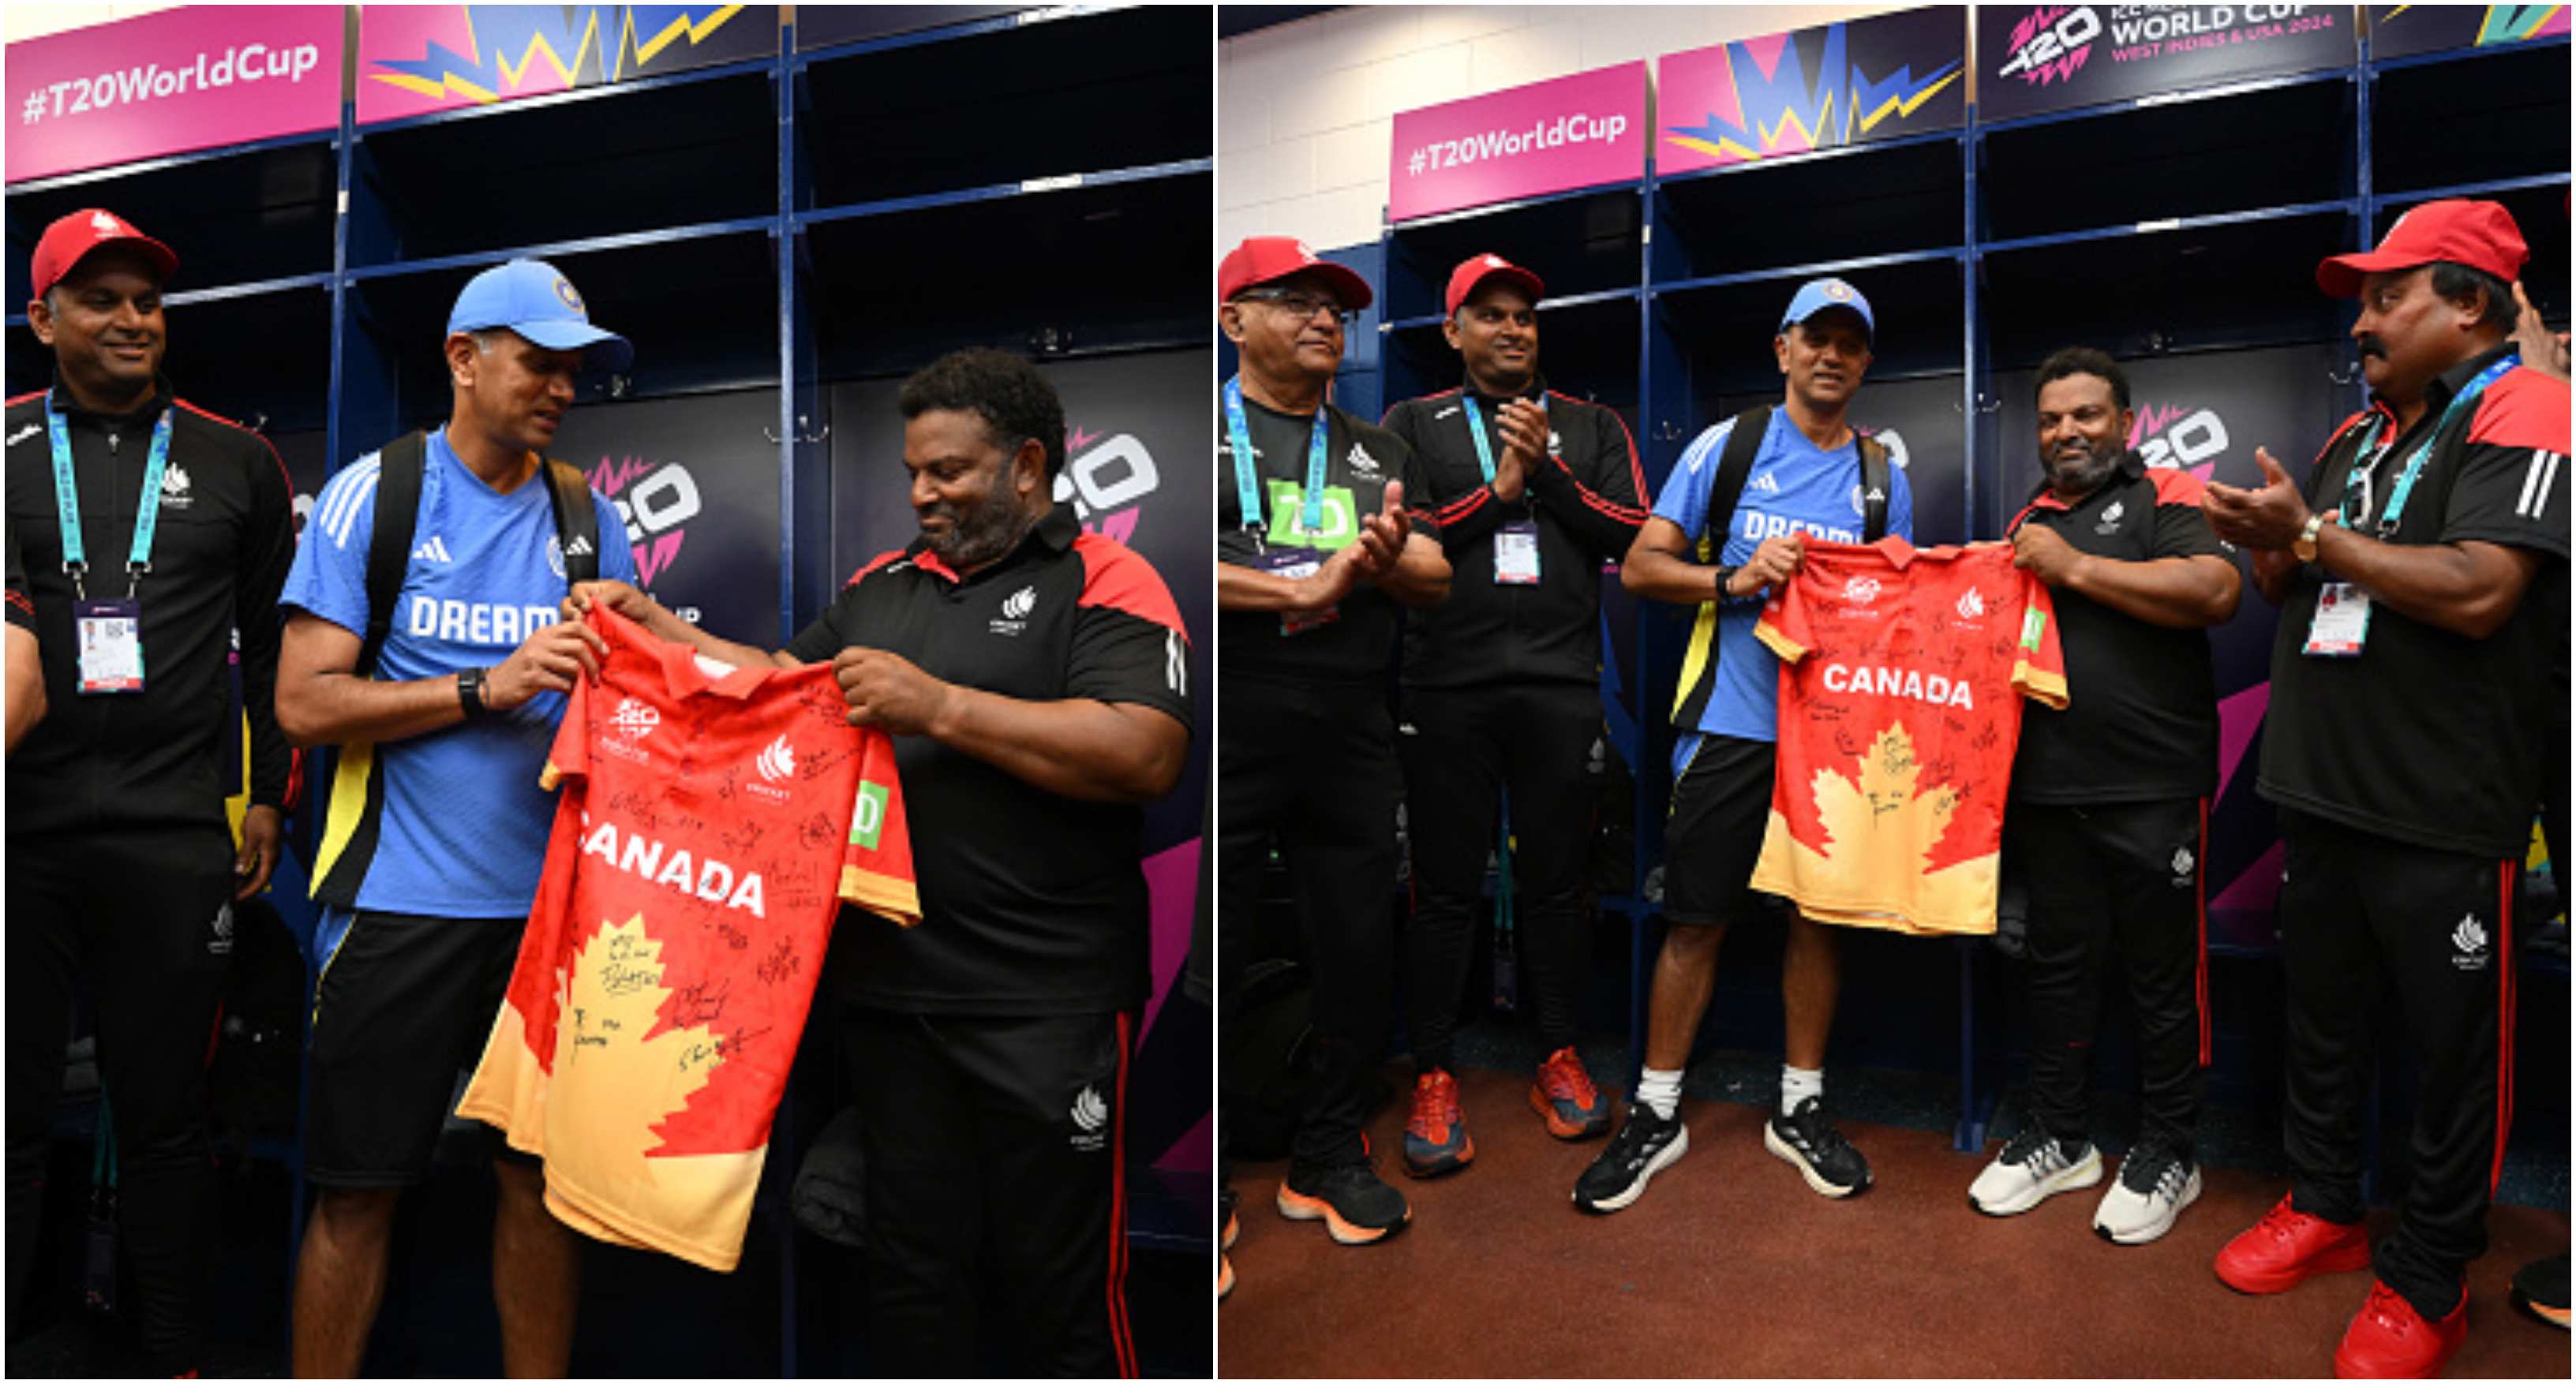 Canada cricket team gifted their signed jersey to Rahul Dravid | Getty